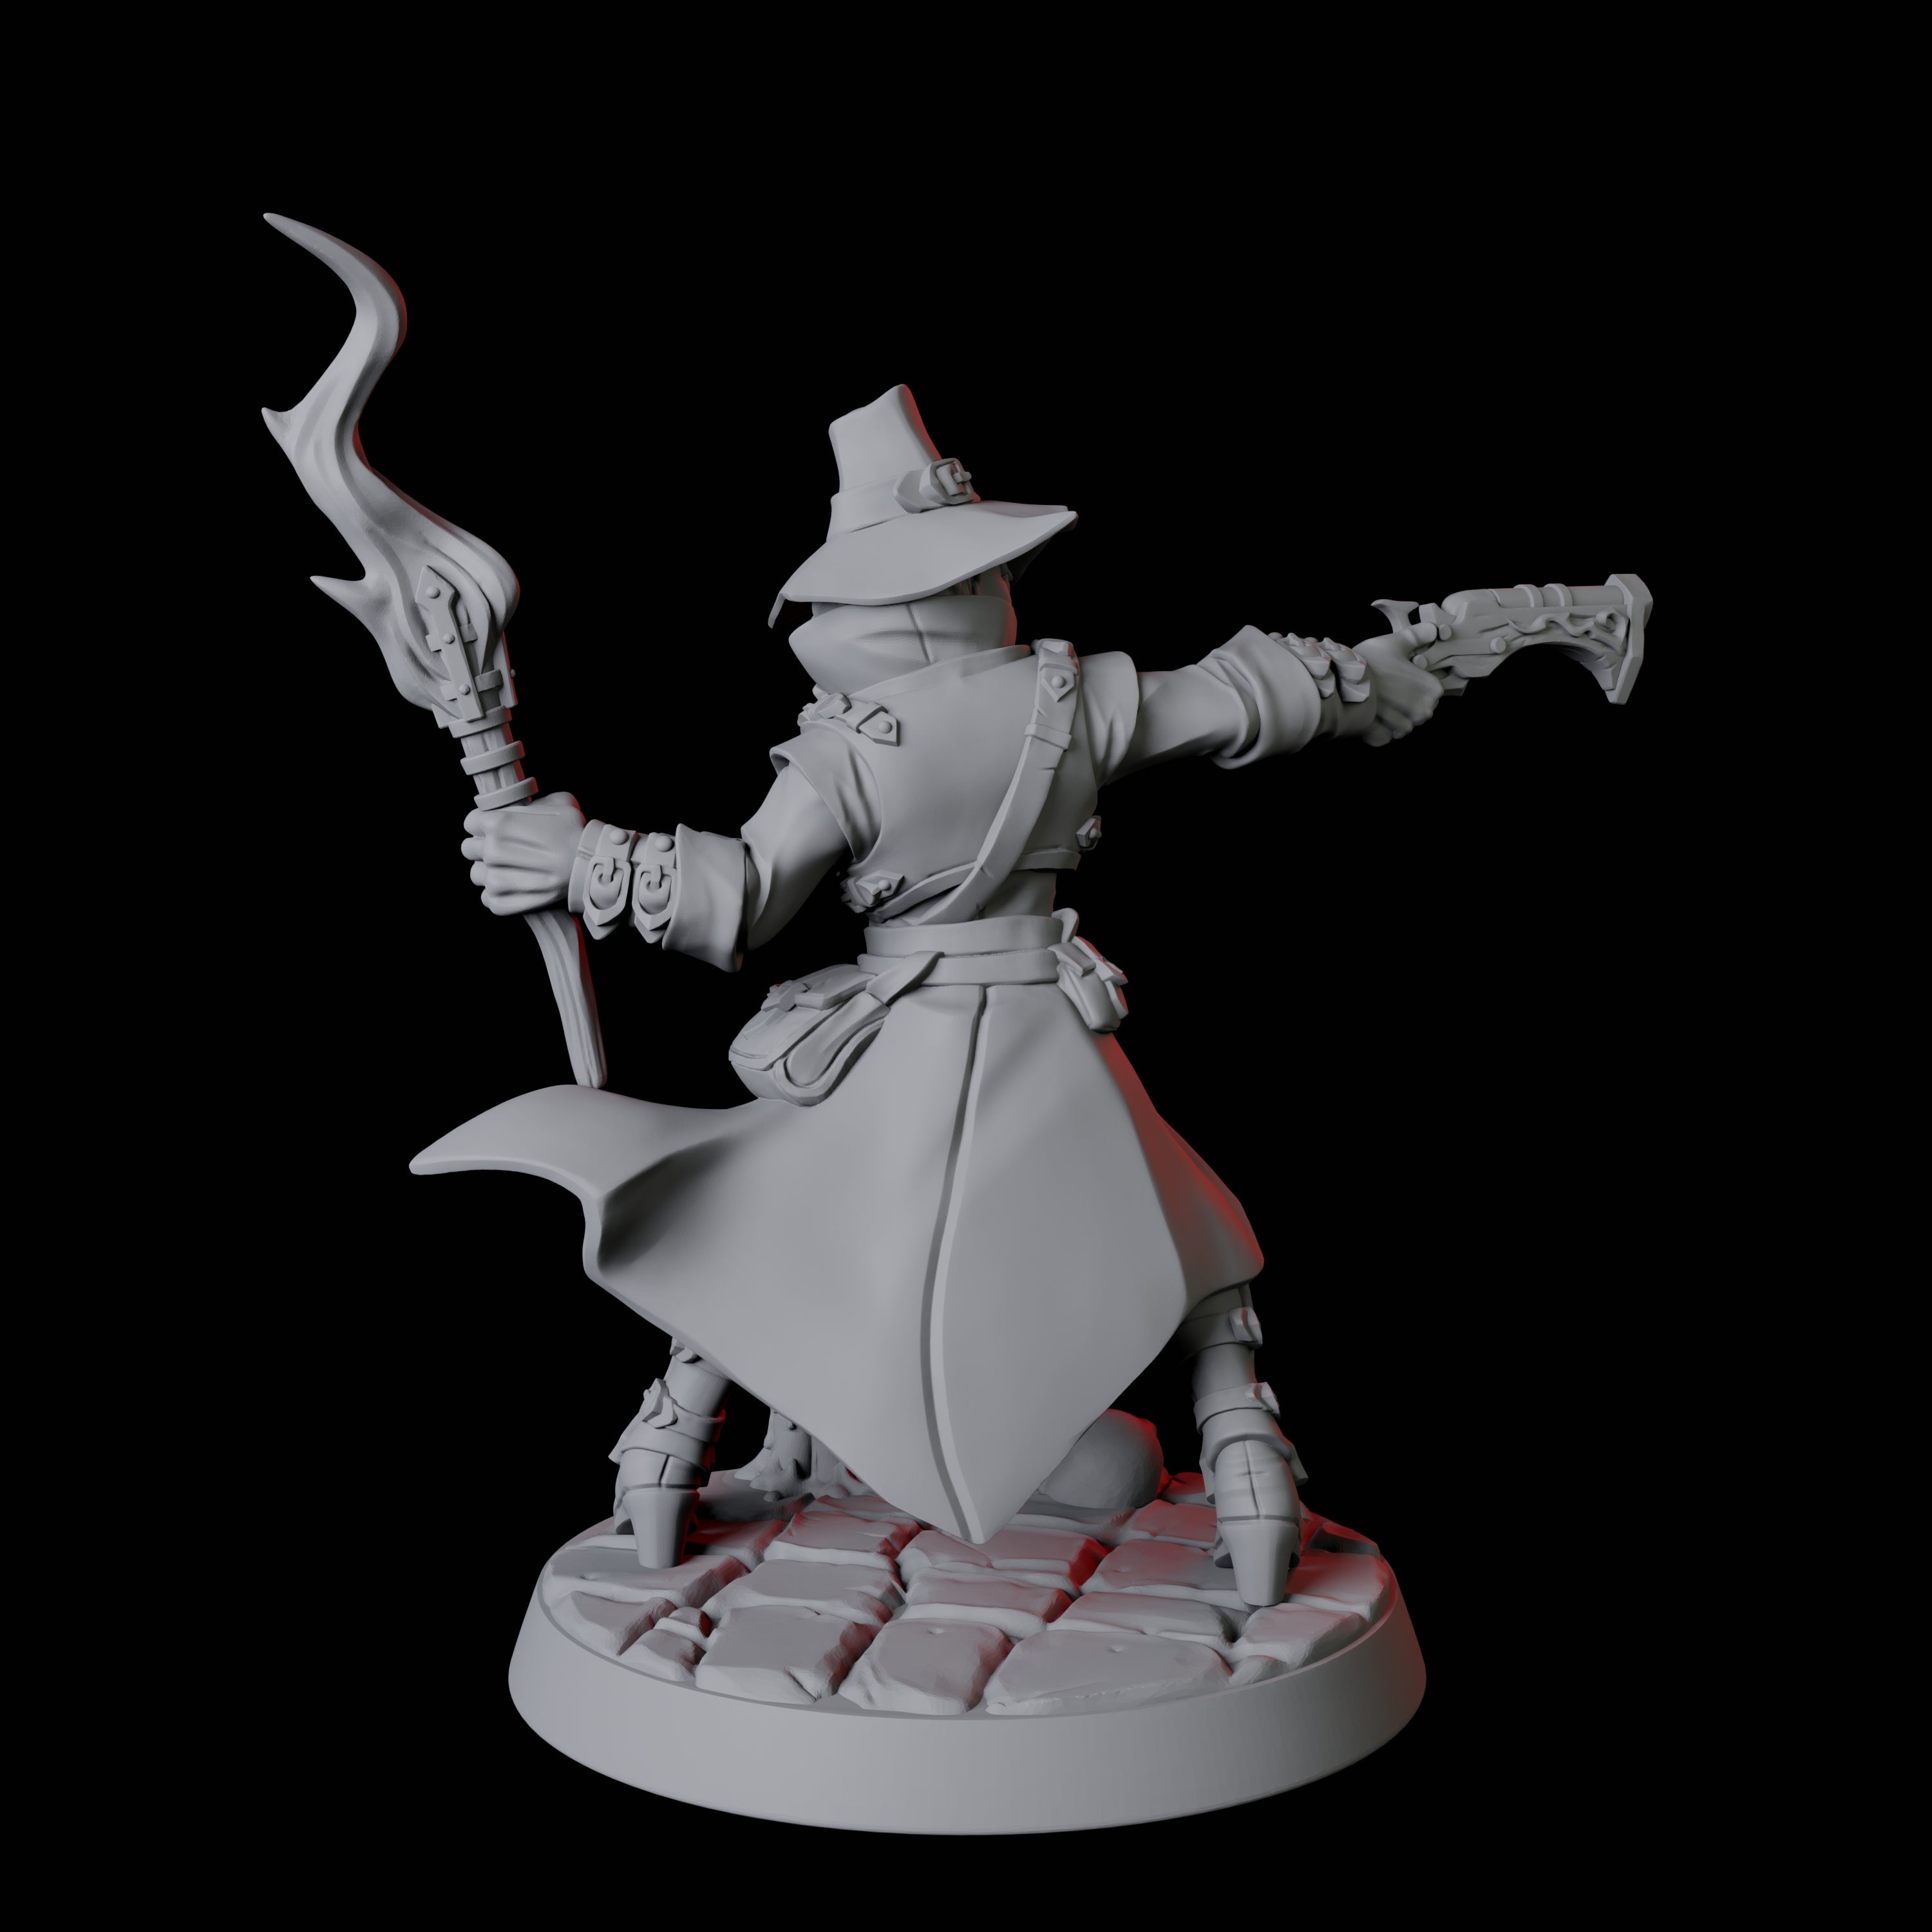 Vampire Hunter E Miniature for Dungeons and Dragons, Pathfinder or other TTRPGs